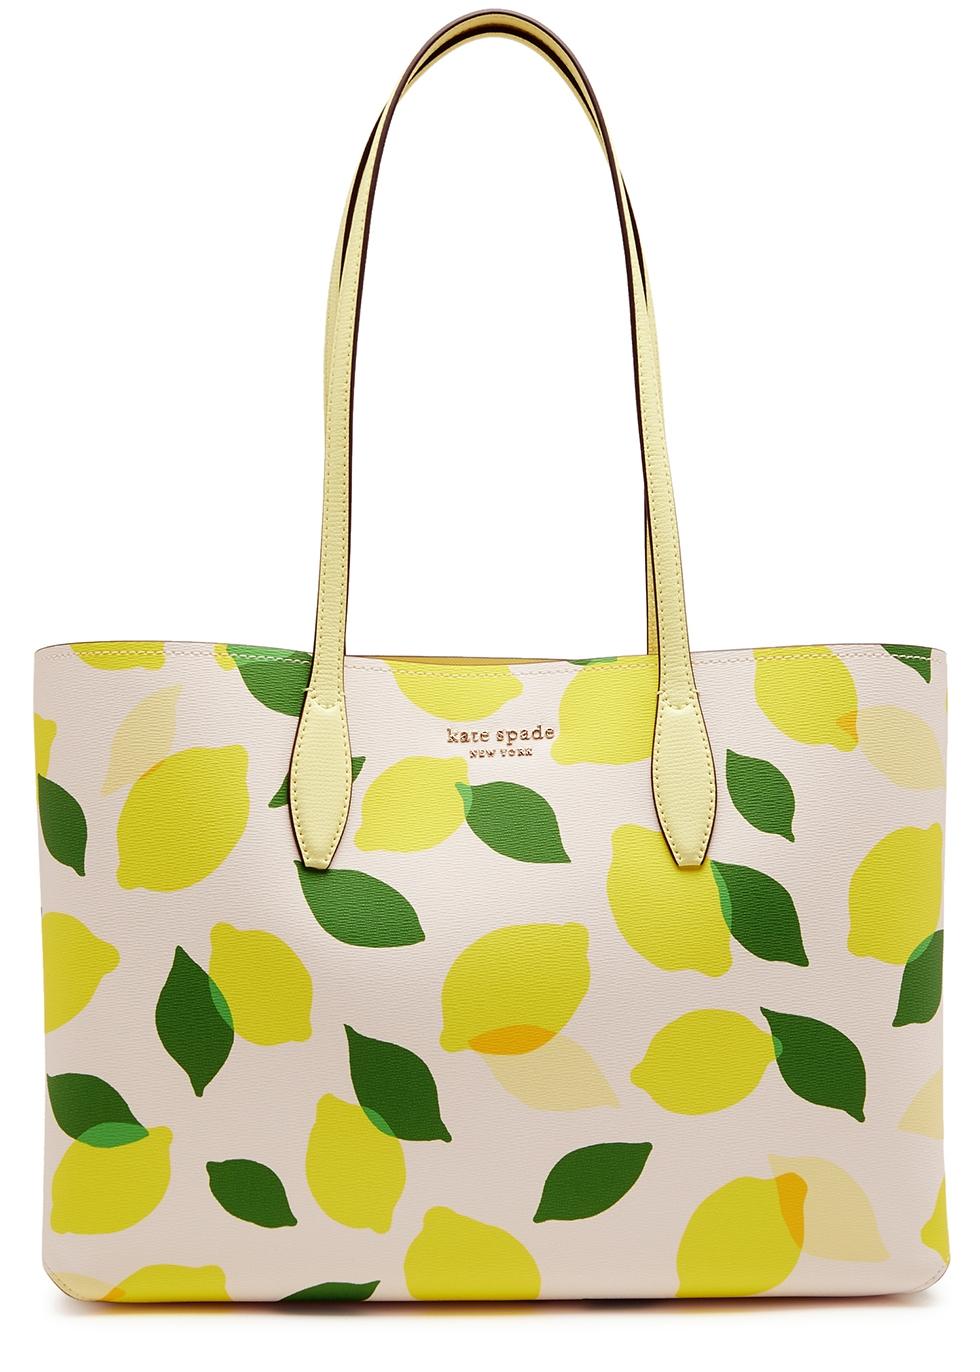 Kate Spade All Day Large Lemon-print Leather Tote in Yellow | Lyst